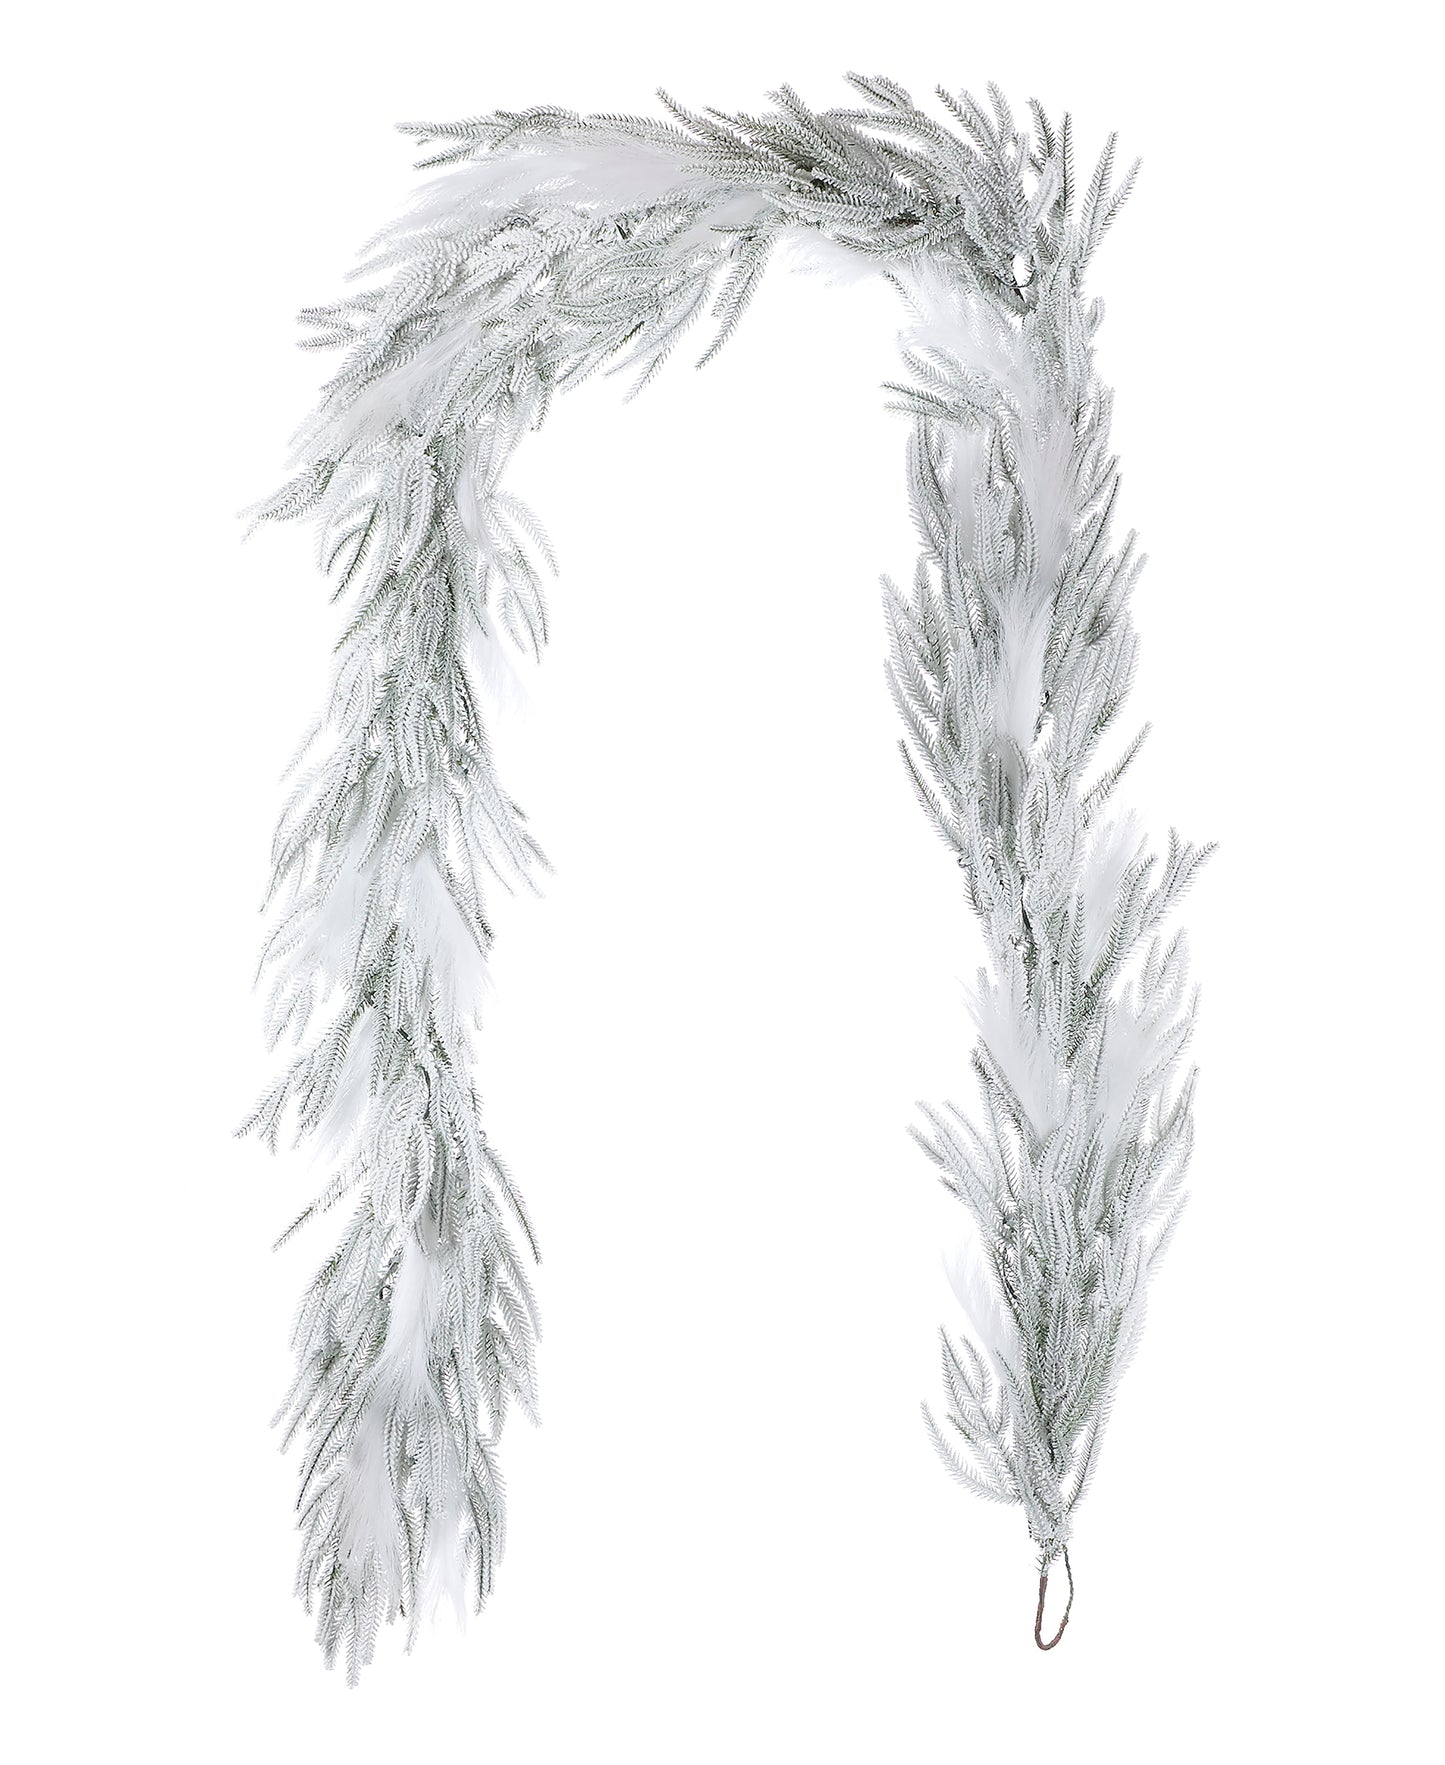 Pine and Pampas 9ft Garland, Pre-Lit 50 Warm White SMD LED Lights (plug in), 660 Flocked PE/PVC Tips, 21 White Pampas